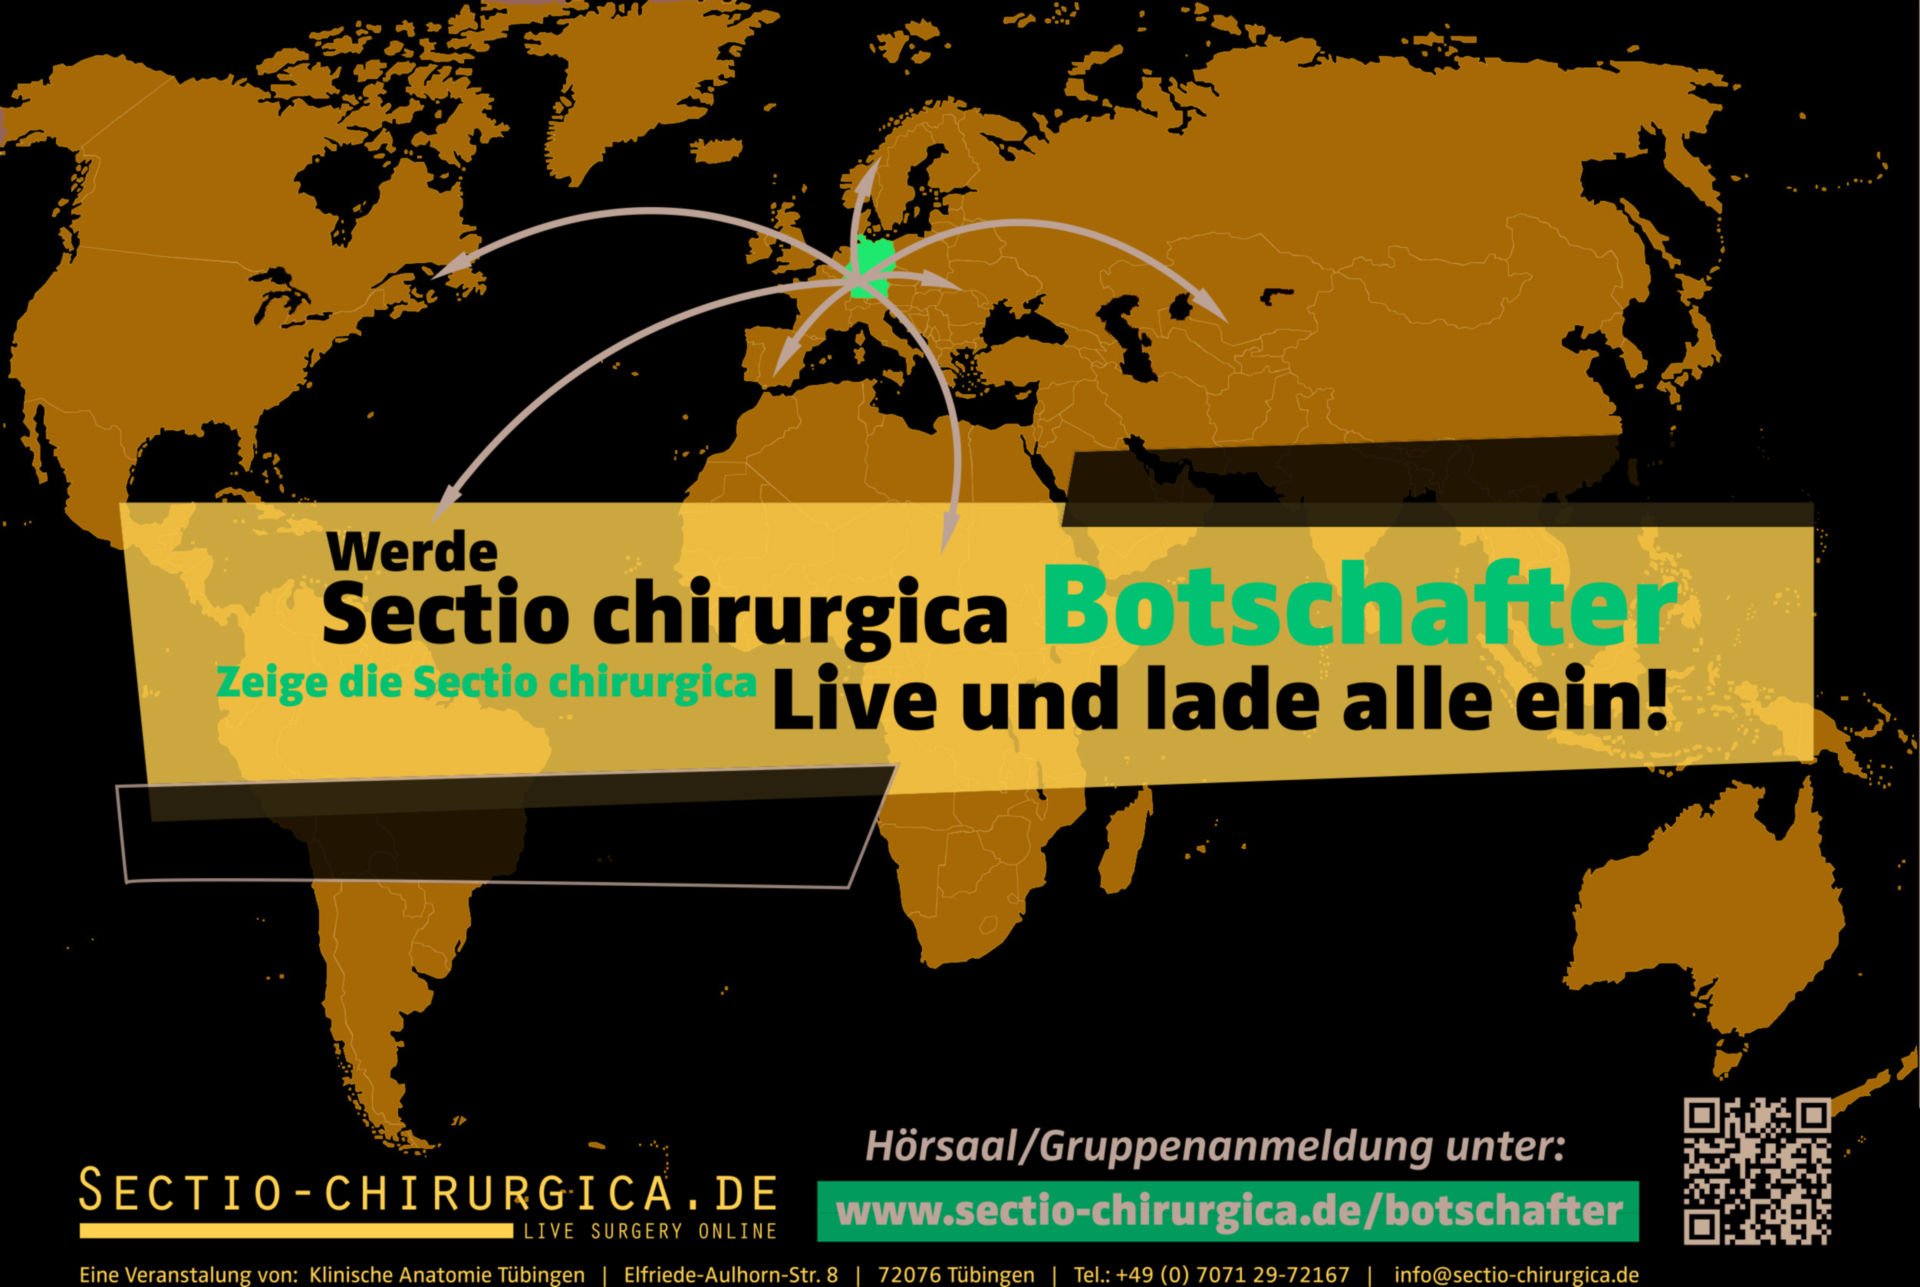 Sectio chirurgica Botschafter